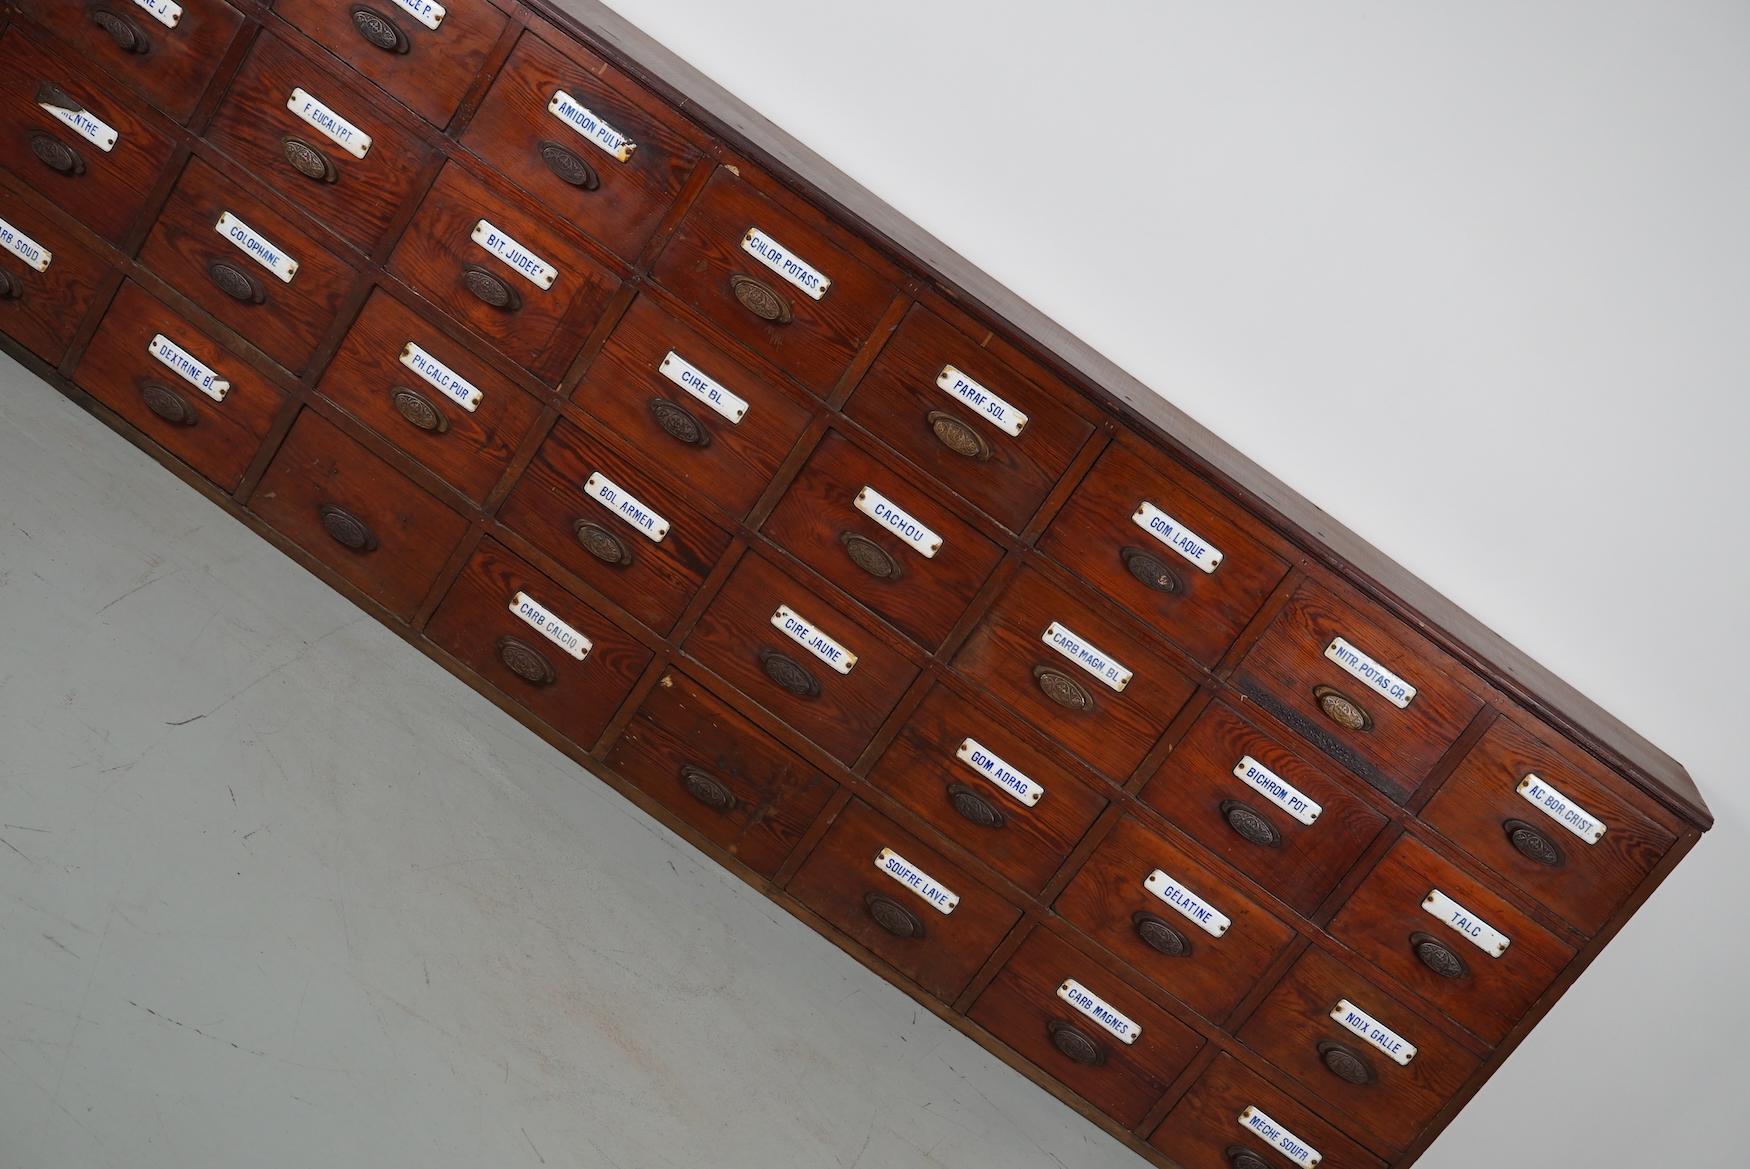 This apothecary bank of drawers was designed and made circa 1900 in Belgium. It was made from pitch pine with cast iron art nouveau style handles and enamel name plates for the contents. The cabinet has retained a rich patina with some natural